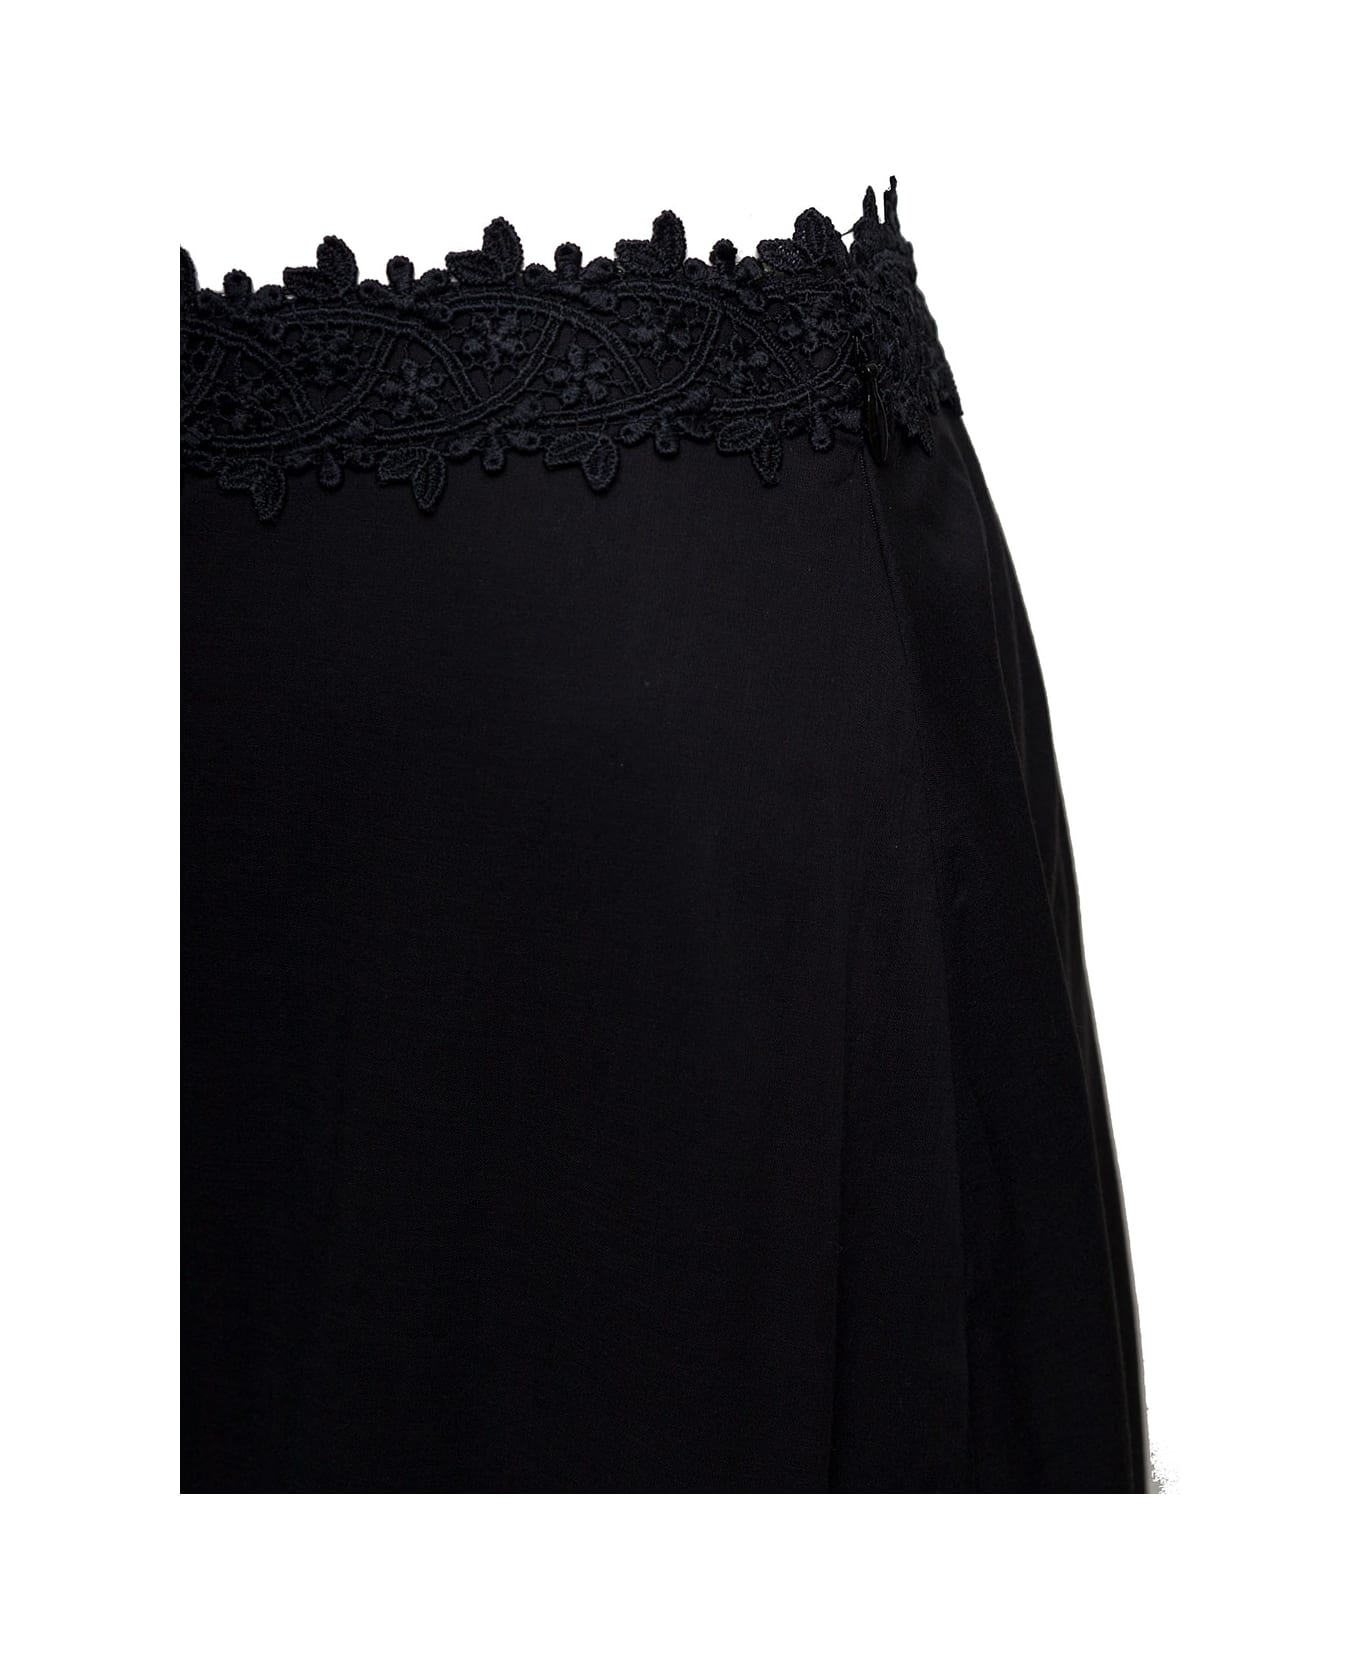 Charo Ruiz 'viola' Black Flounced Skirt With Lace Inserts In Cotton Blend Woman - Black